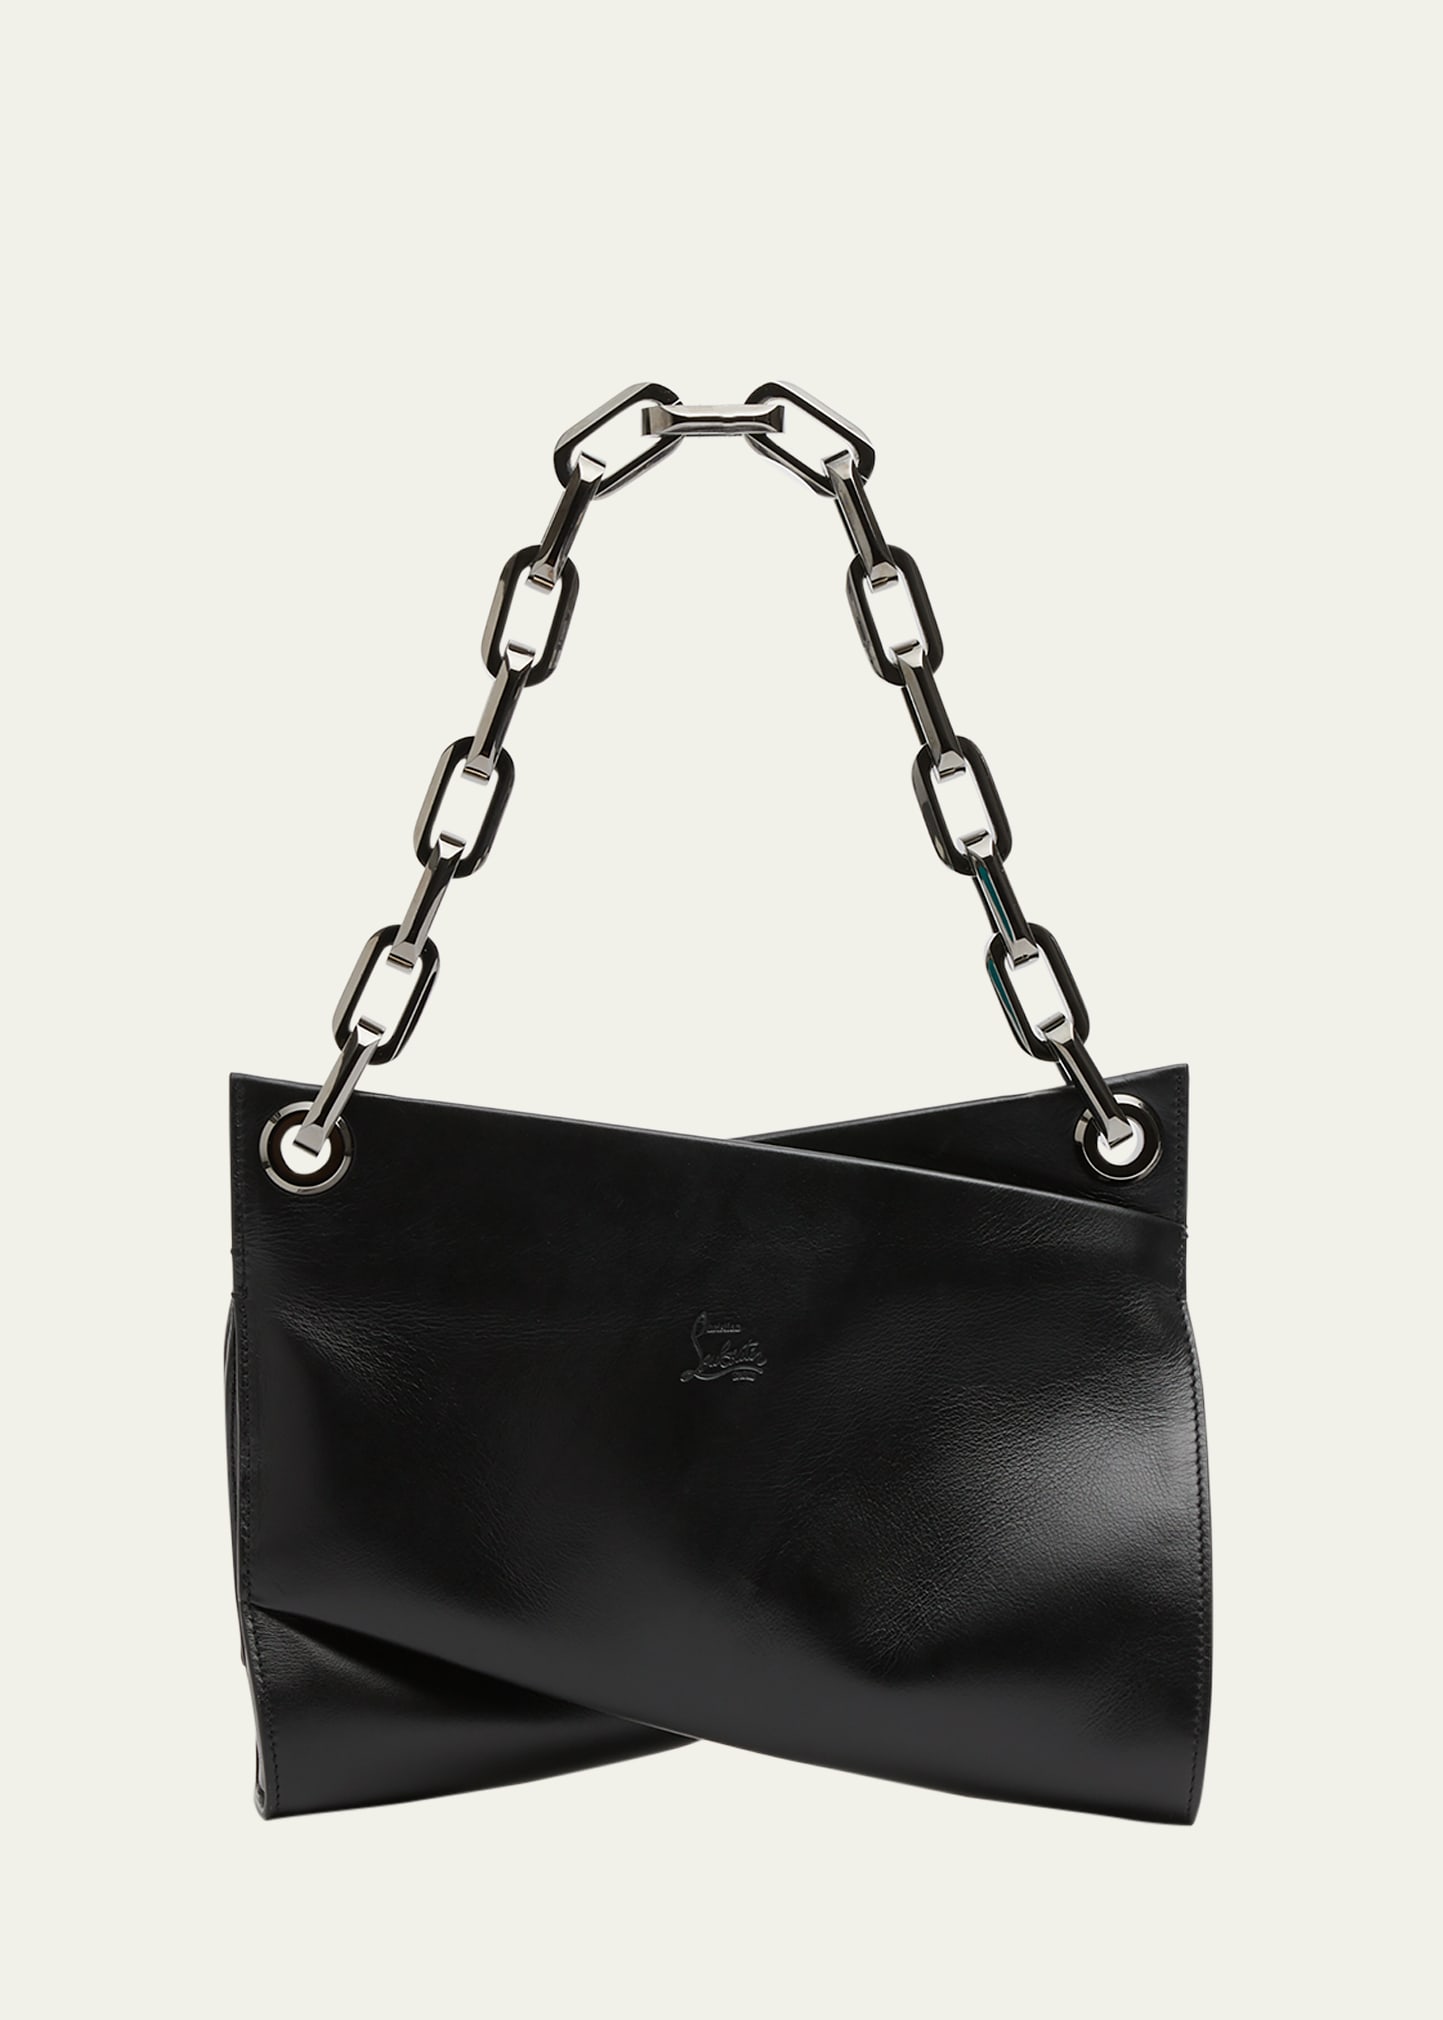 Christian Louboutin Loubitwist Chain Shoulder Bag In Leather In Black